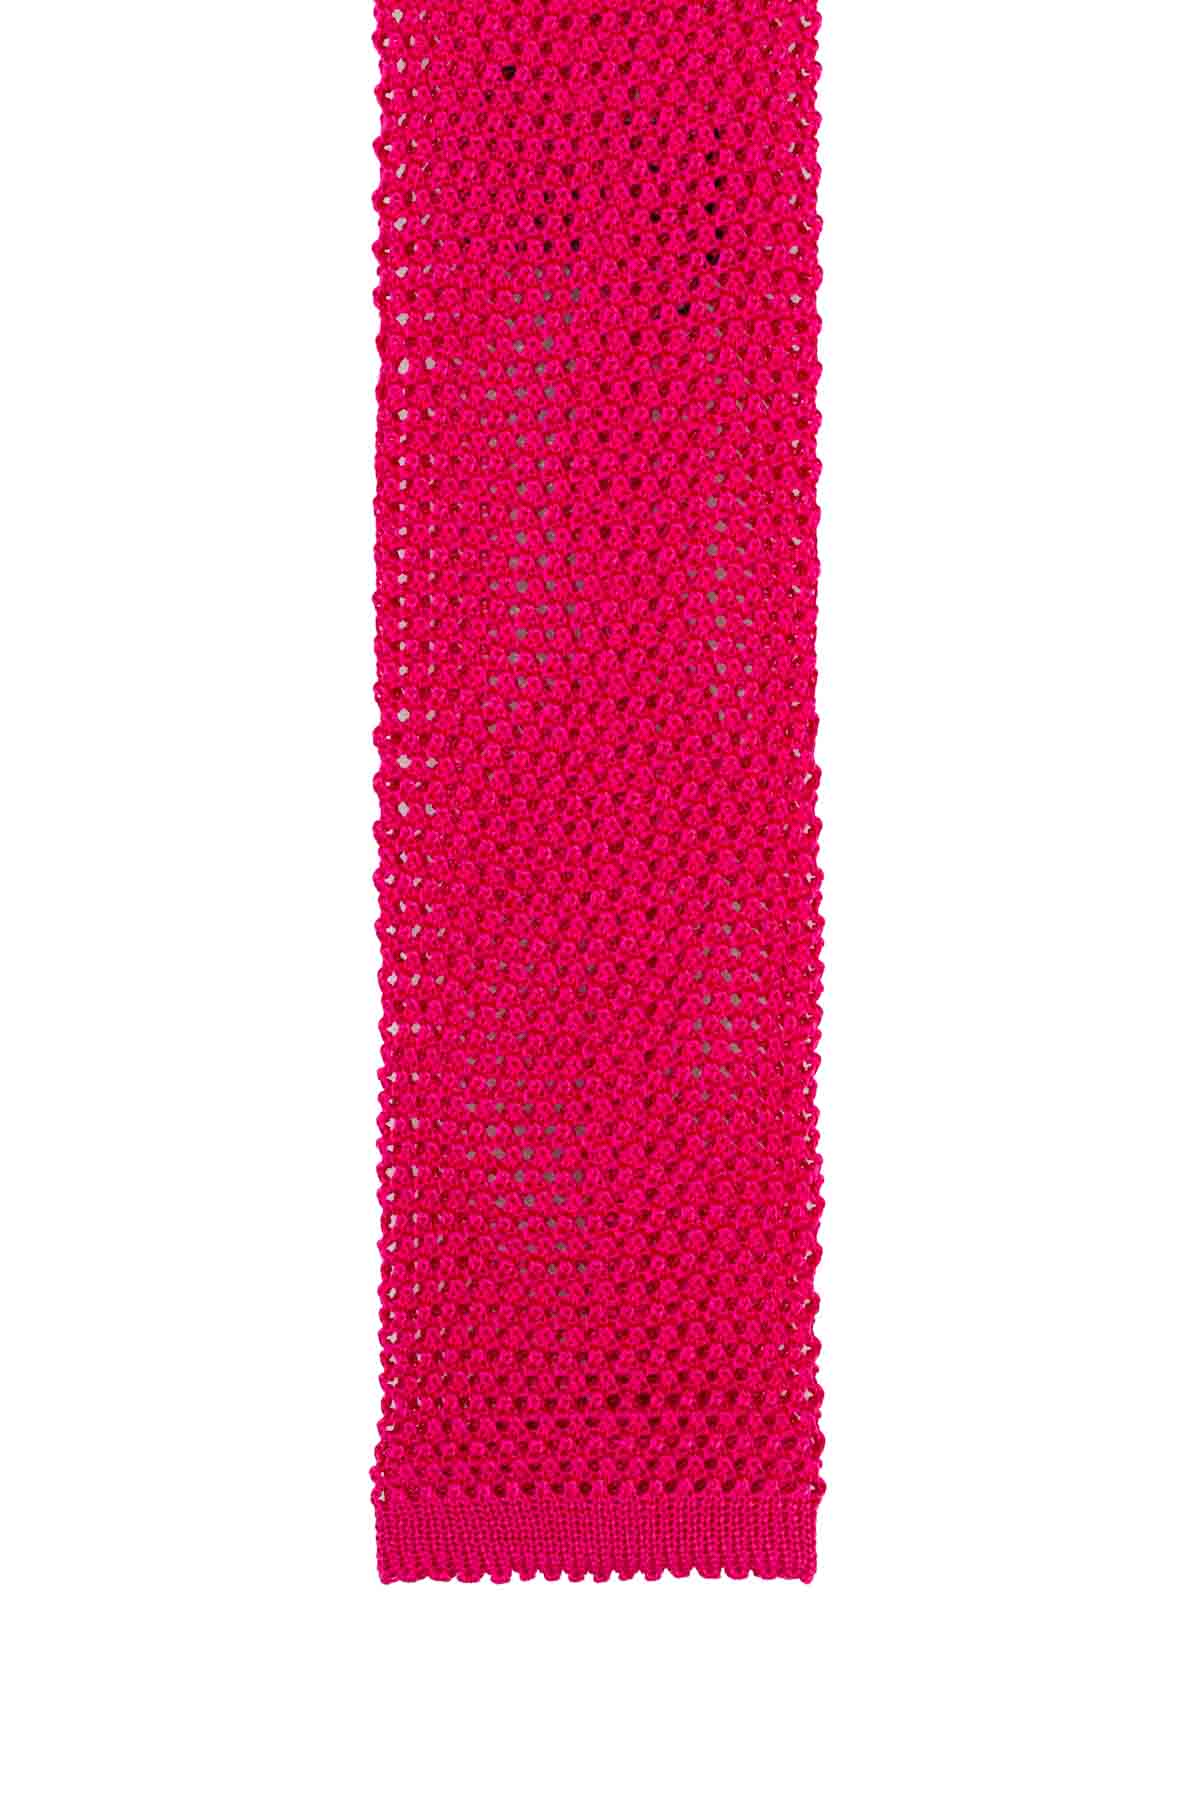 Italian Knitted Tie - Bright Pink